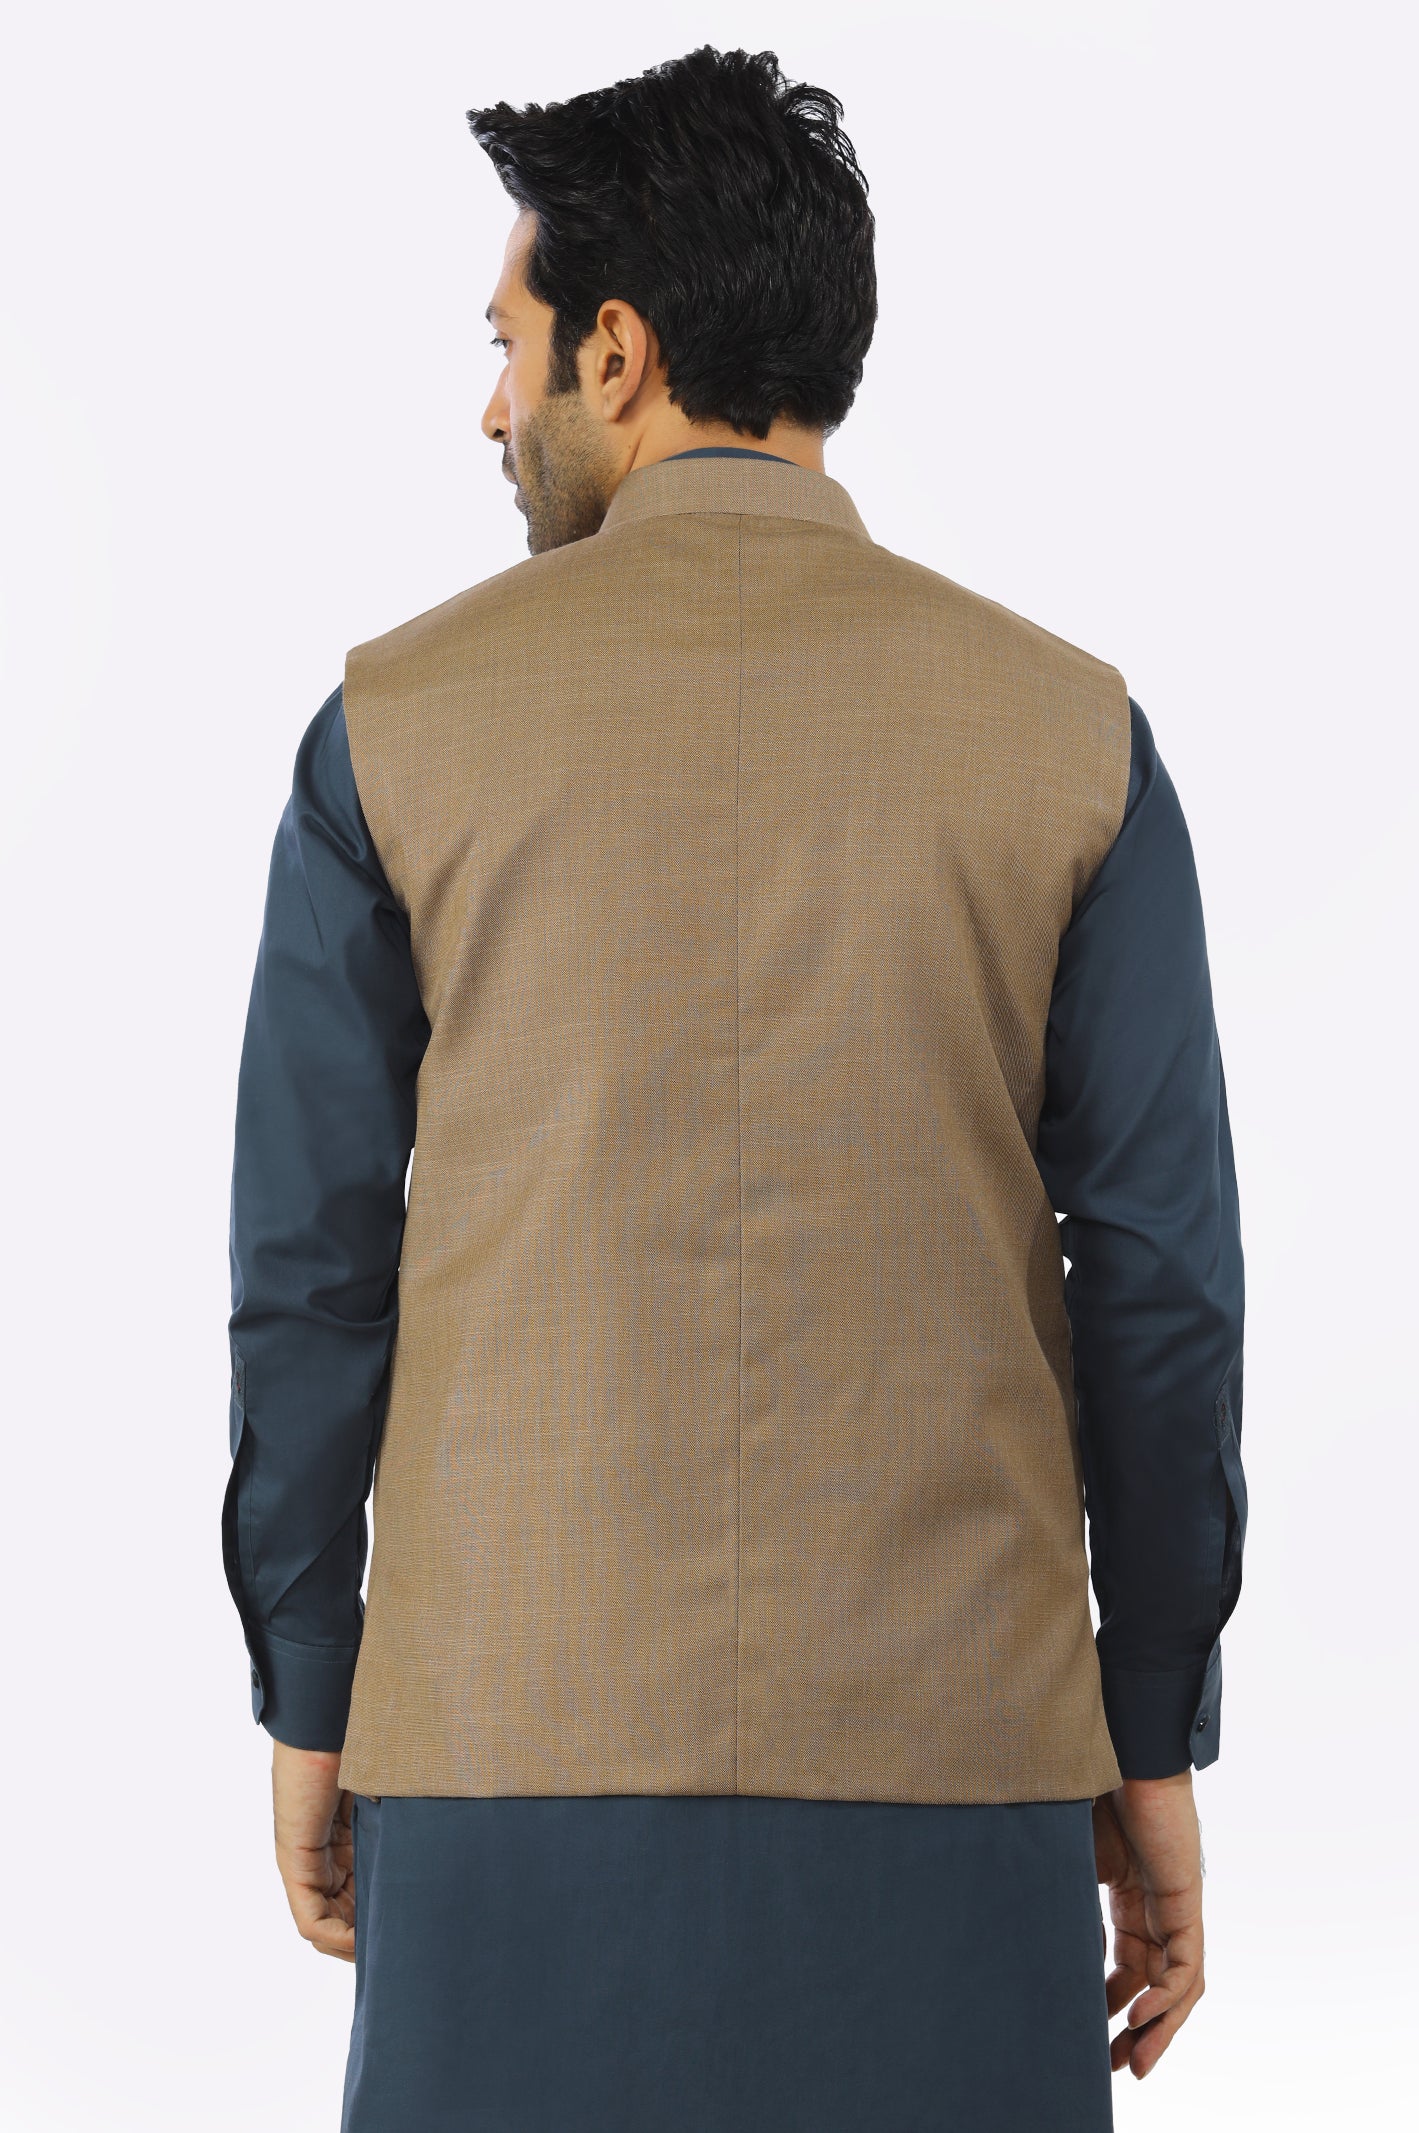 Brown Waistcoat From Diners